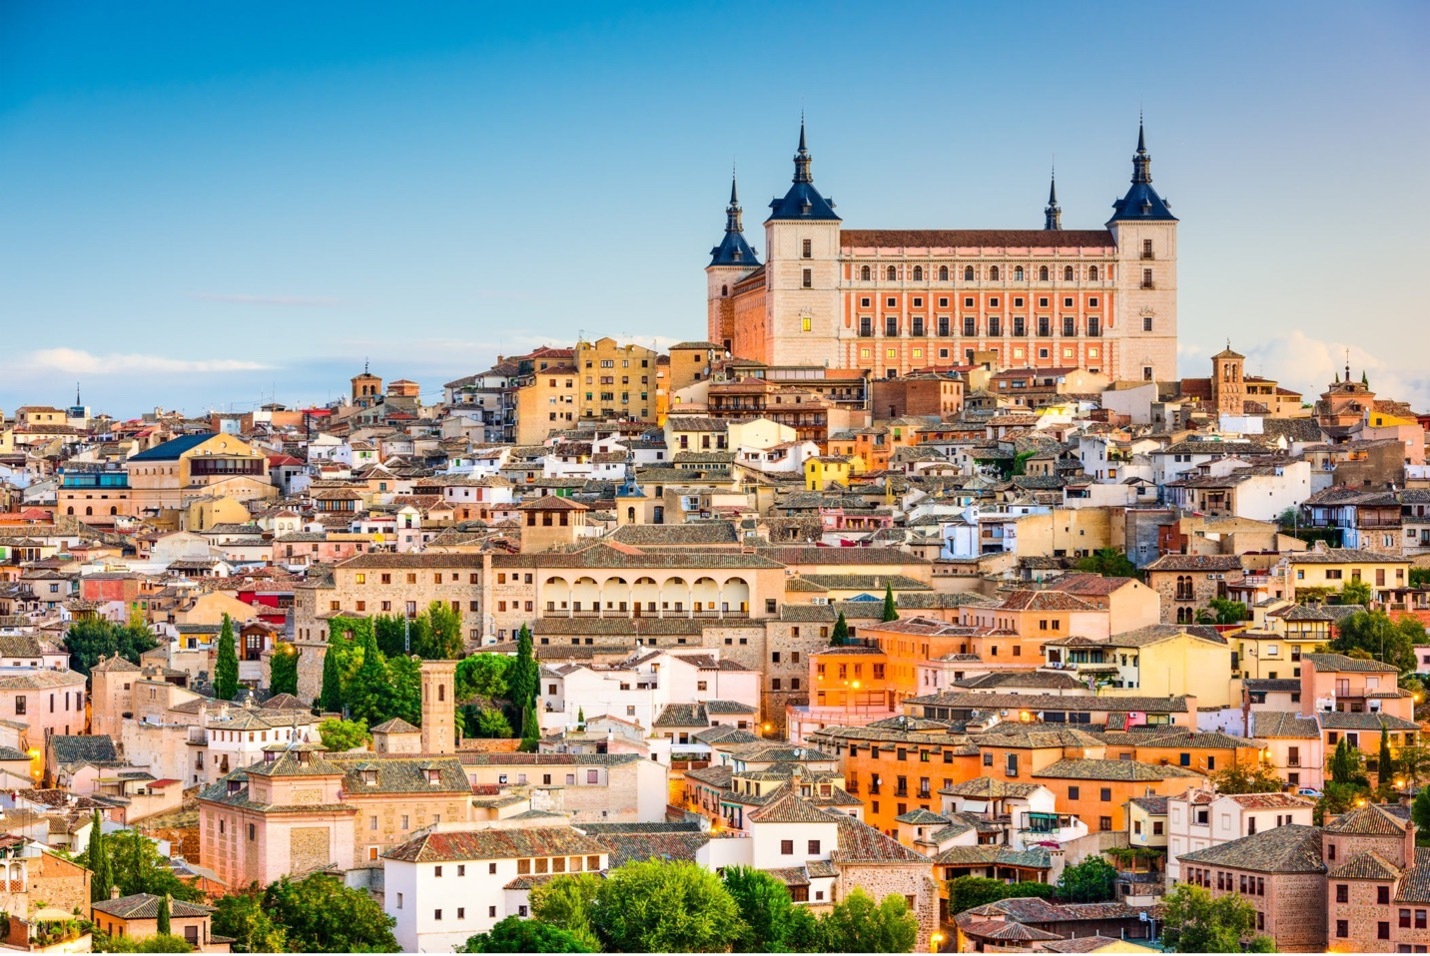 Spain has recently allowed digital nomad visa under the country’s new Startup Act